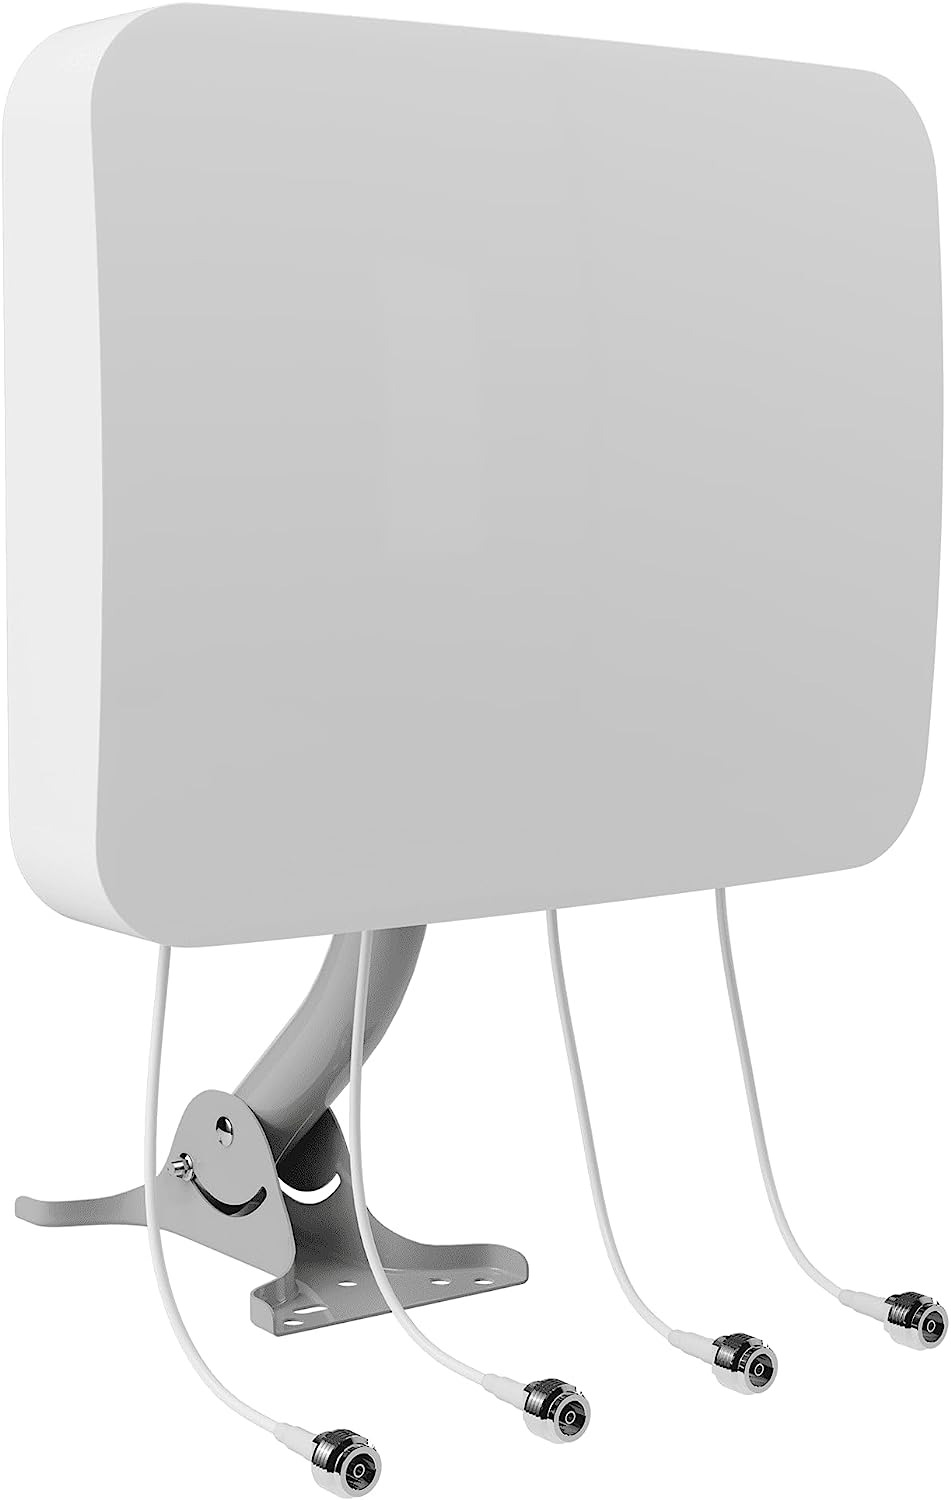 MIMO 4X4 Panel Antenna for 4G & 5G Cellular Hotspots, Routers (Antenna Only)